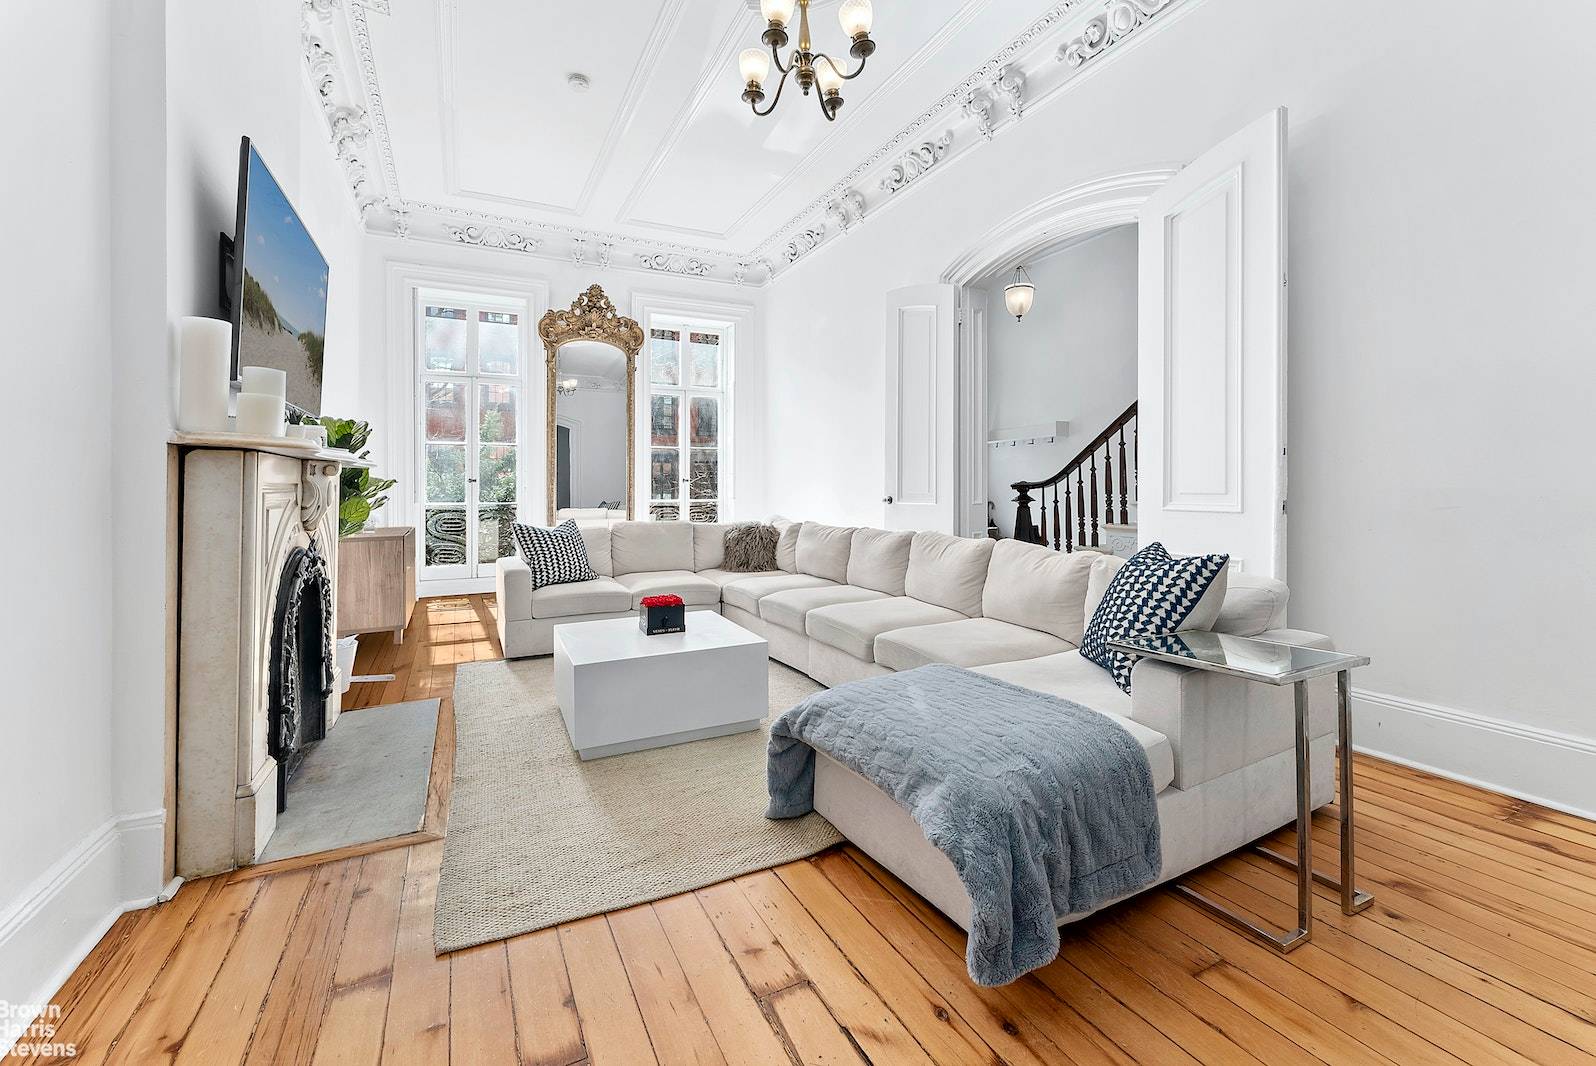 Sprawling Quadruplex Townhouse Home on Prime West Village BlockAvailable June 1 Pets allowedRarely does a home of this magnitude and significance become available for rent on historic Bank Street.